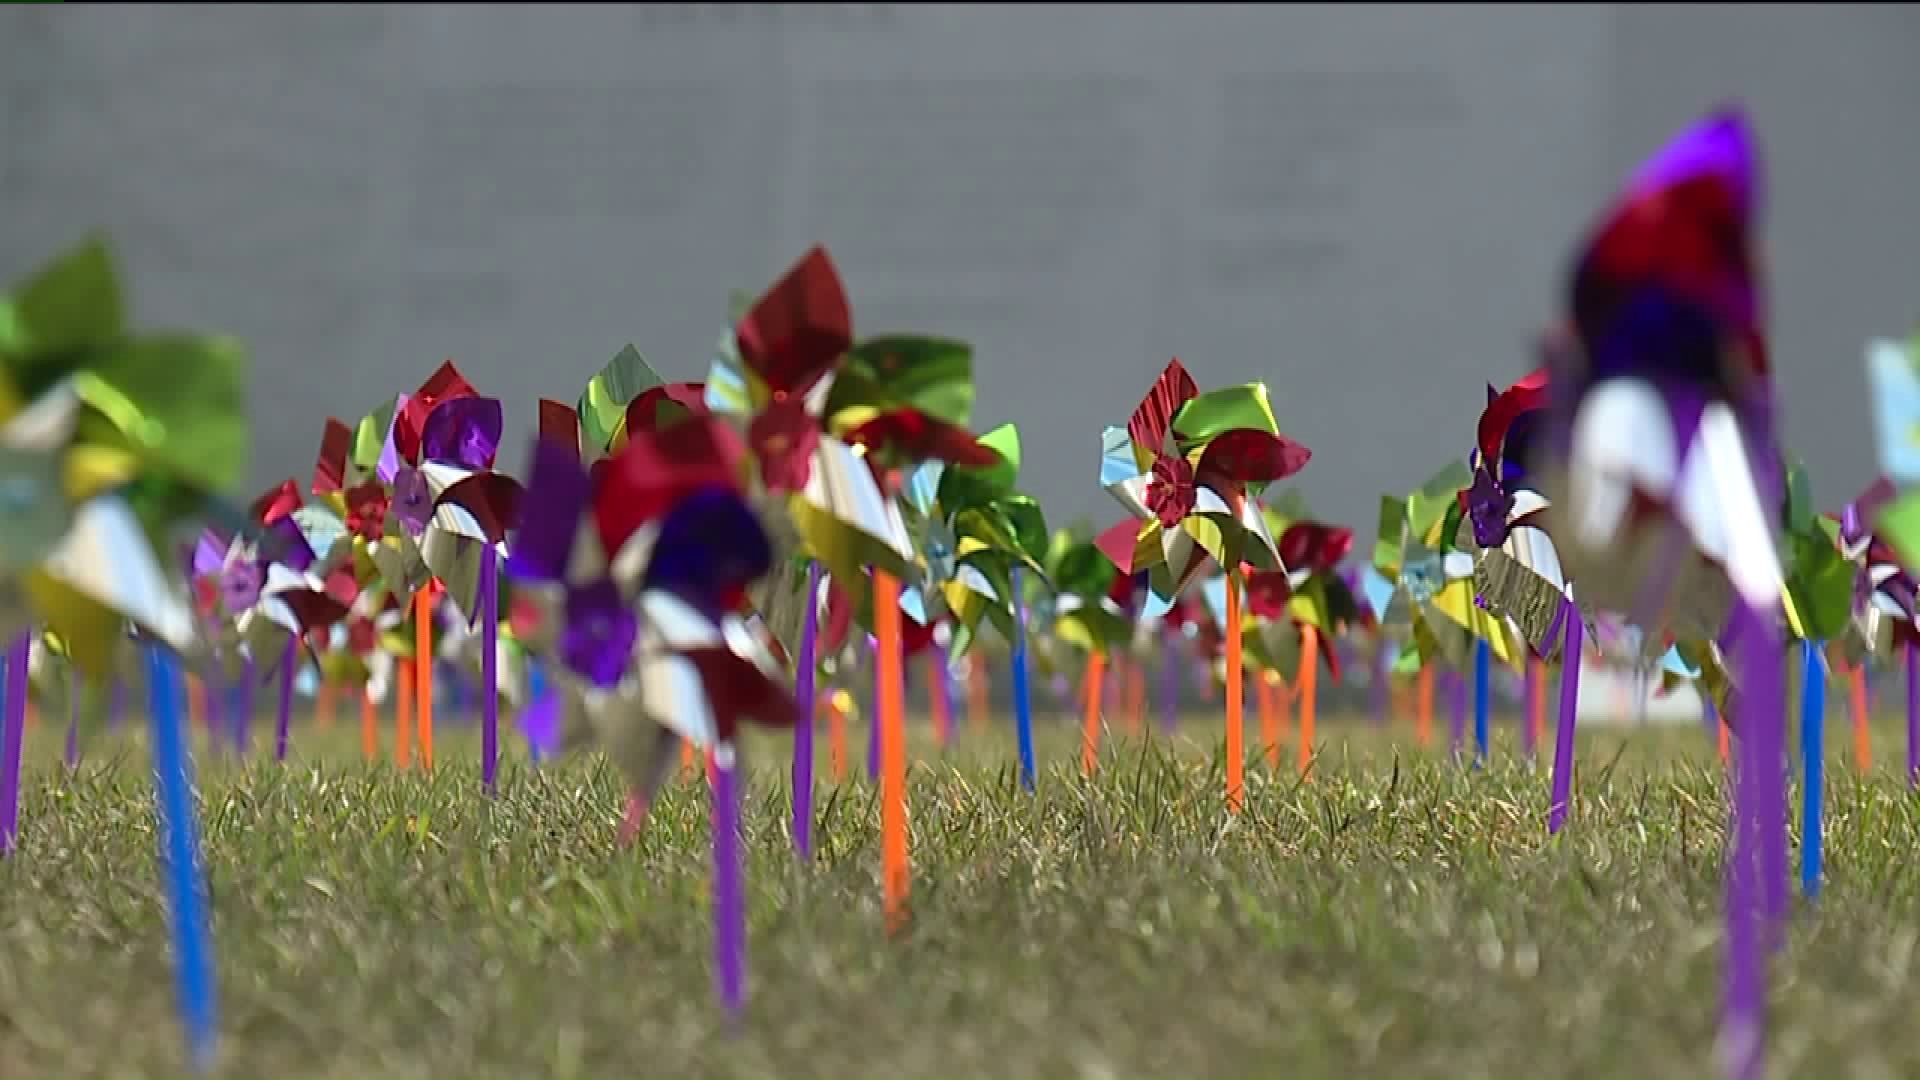 Pinwheels Cover Courthouse Lawn for Child Abuse Prevention Month